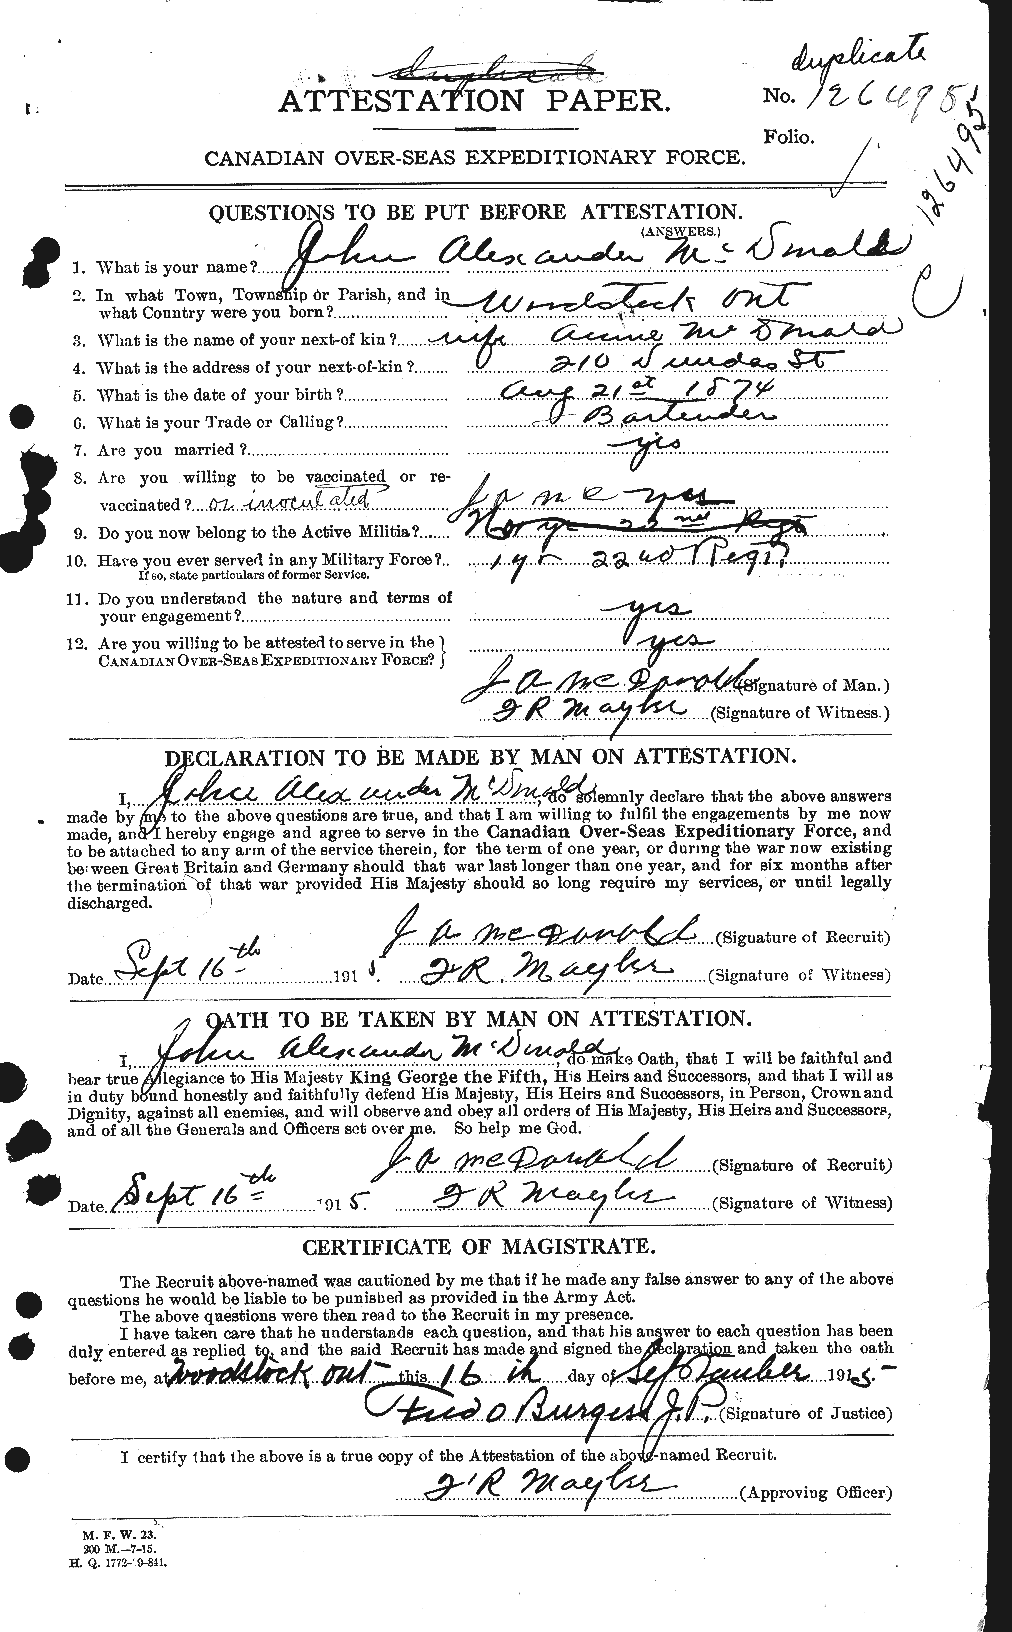 Personnel Records of the First World War - CEF 516502a